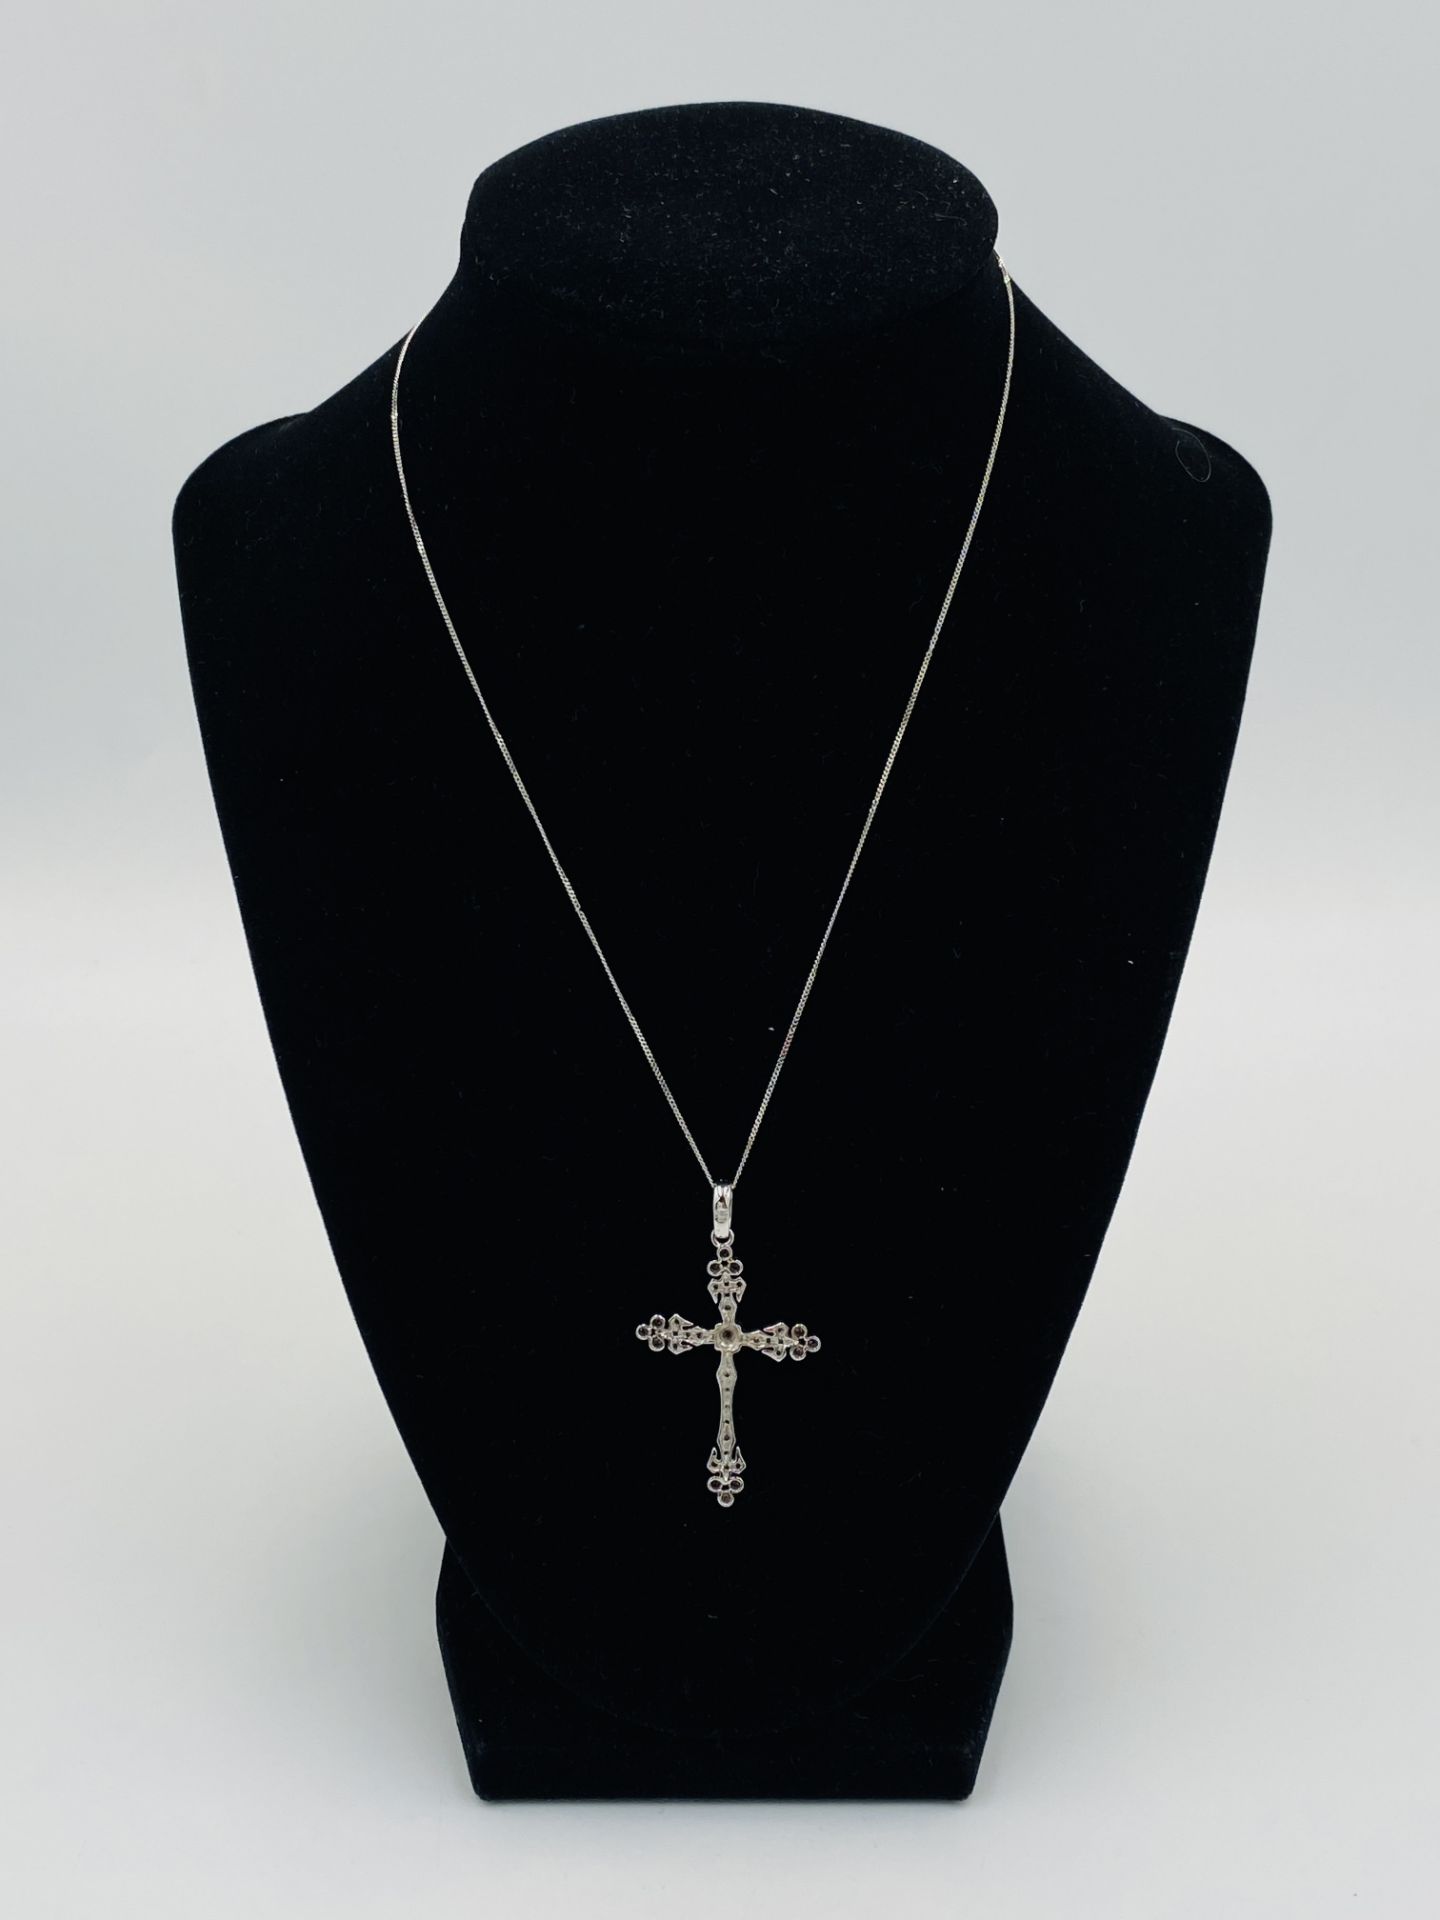 9ct gold and diamond set cross on 9ct gold chain - Image 4 of 4